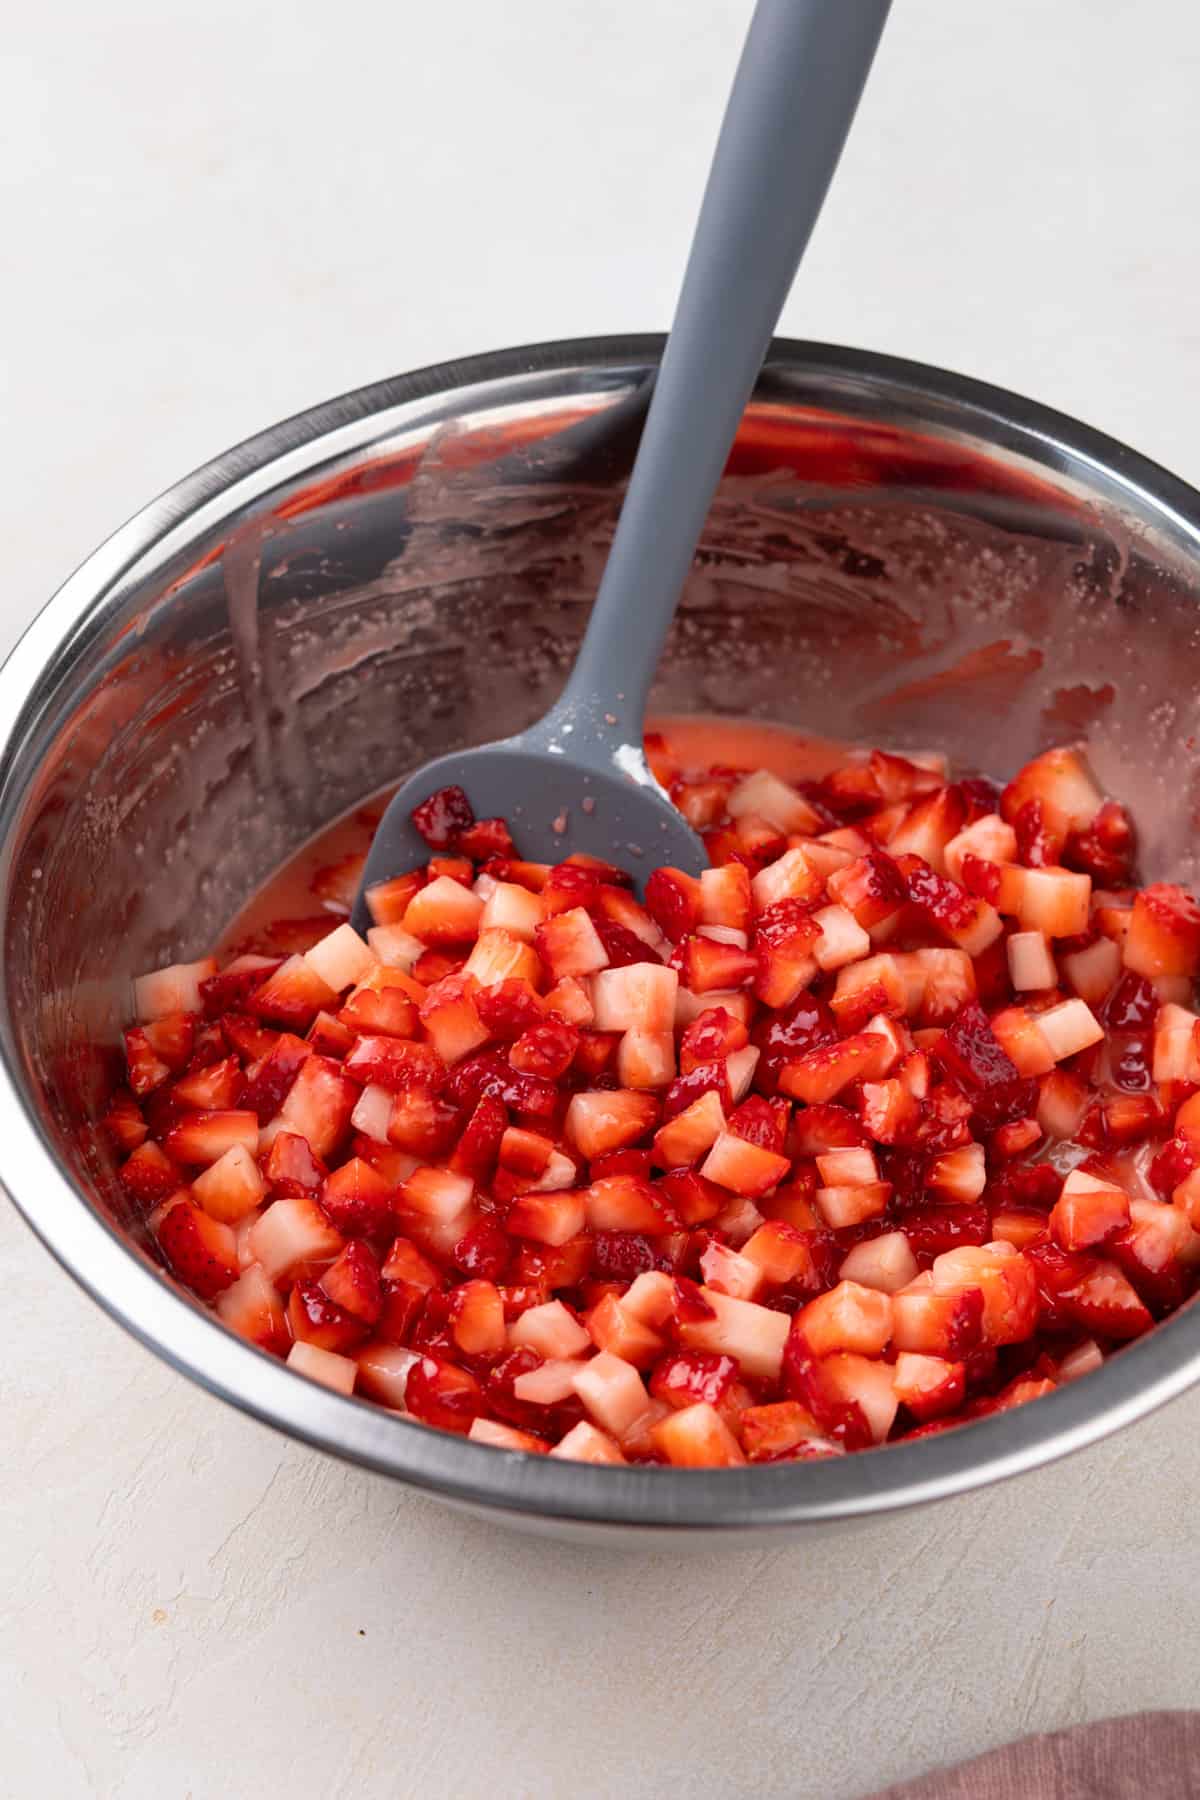 Strawberry filling for oat bars in a metal mixing bowl.